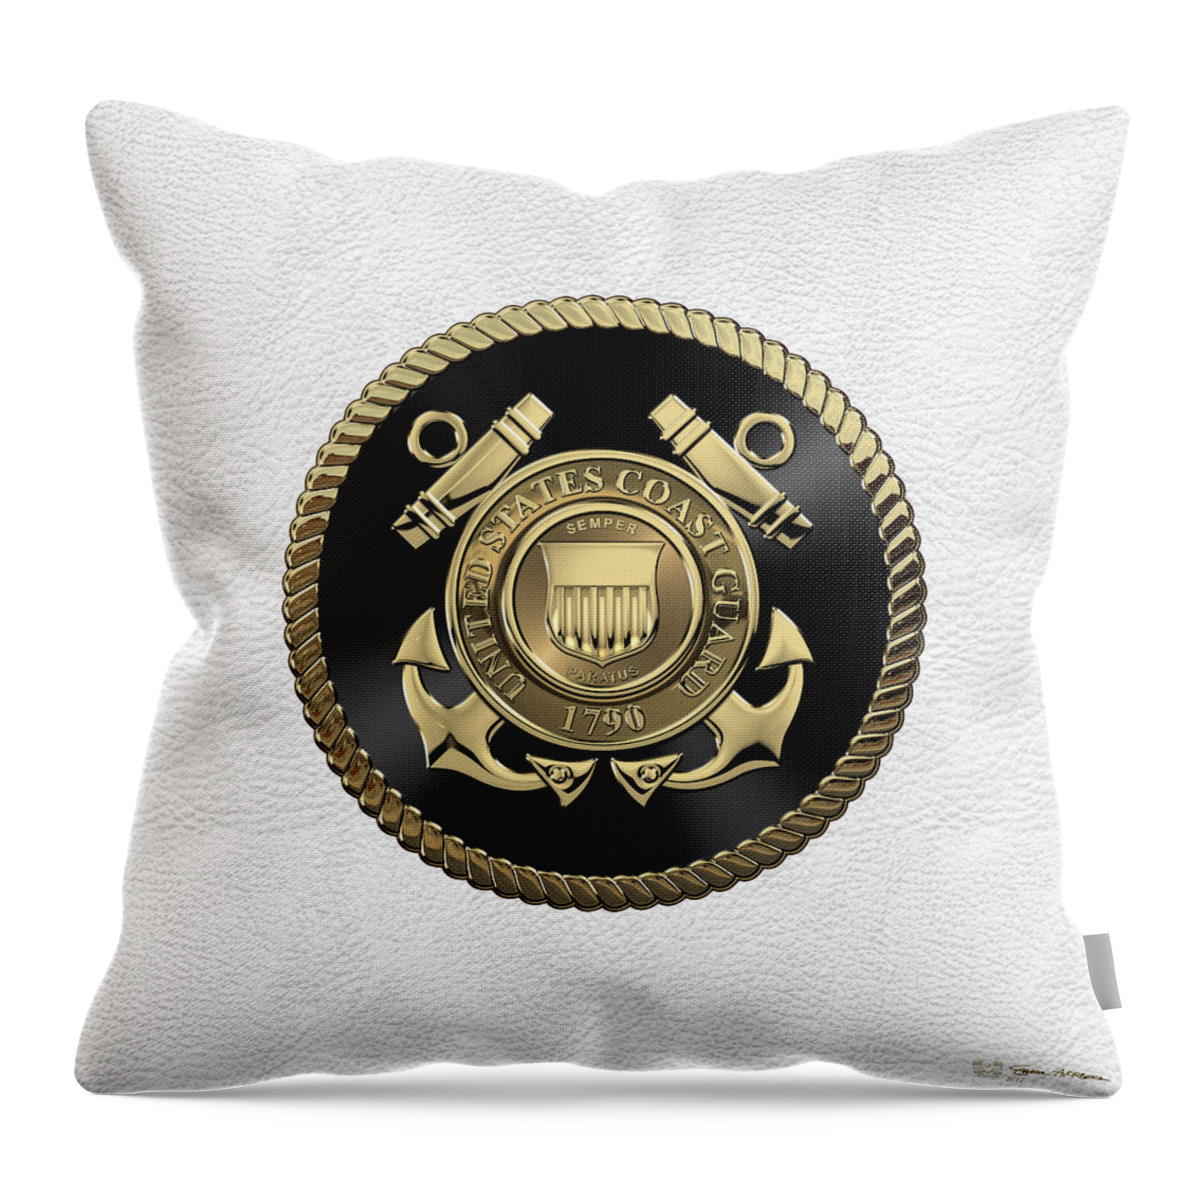 'military Insignia & Heraldry' Collection By Serge Averbukh Throw Pillow featuring the digital art U. S. Coast Guard - U S C G Emblem Black Edition over White Leather by Serge Averbukh